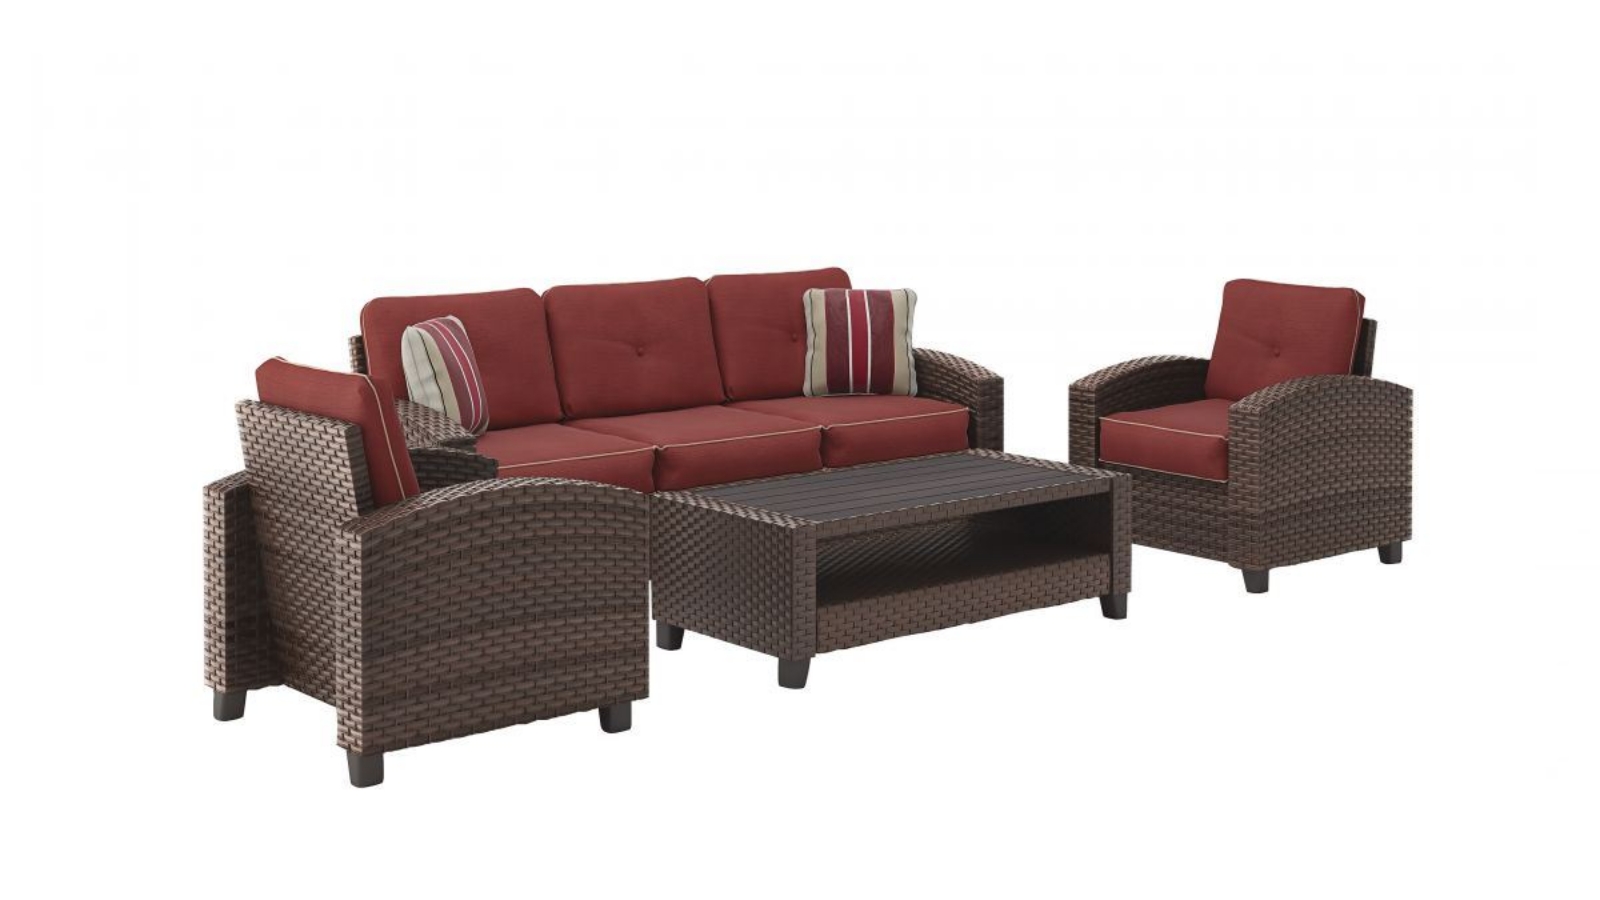 Picture of Meadowtown Patio Sofa, 2 Chairs & Table